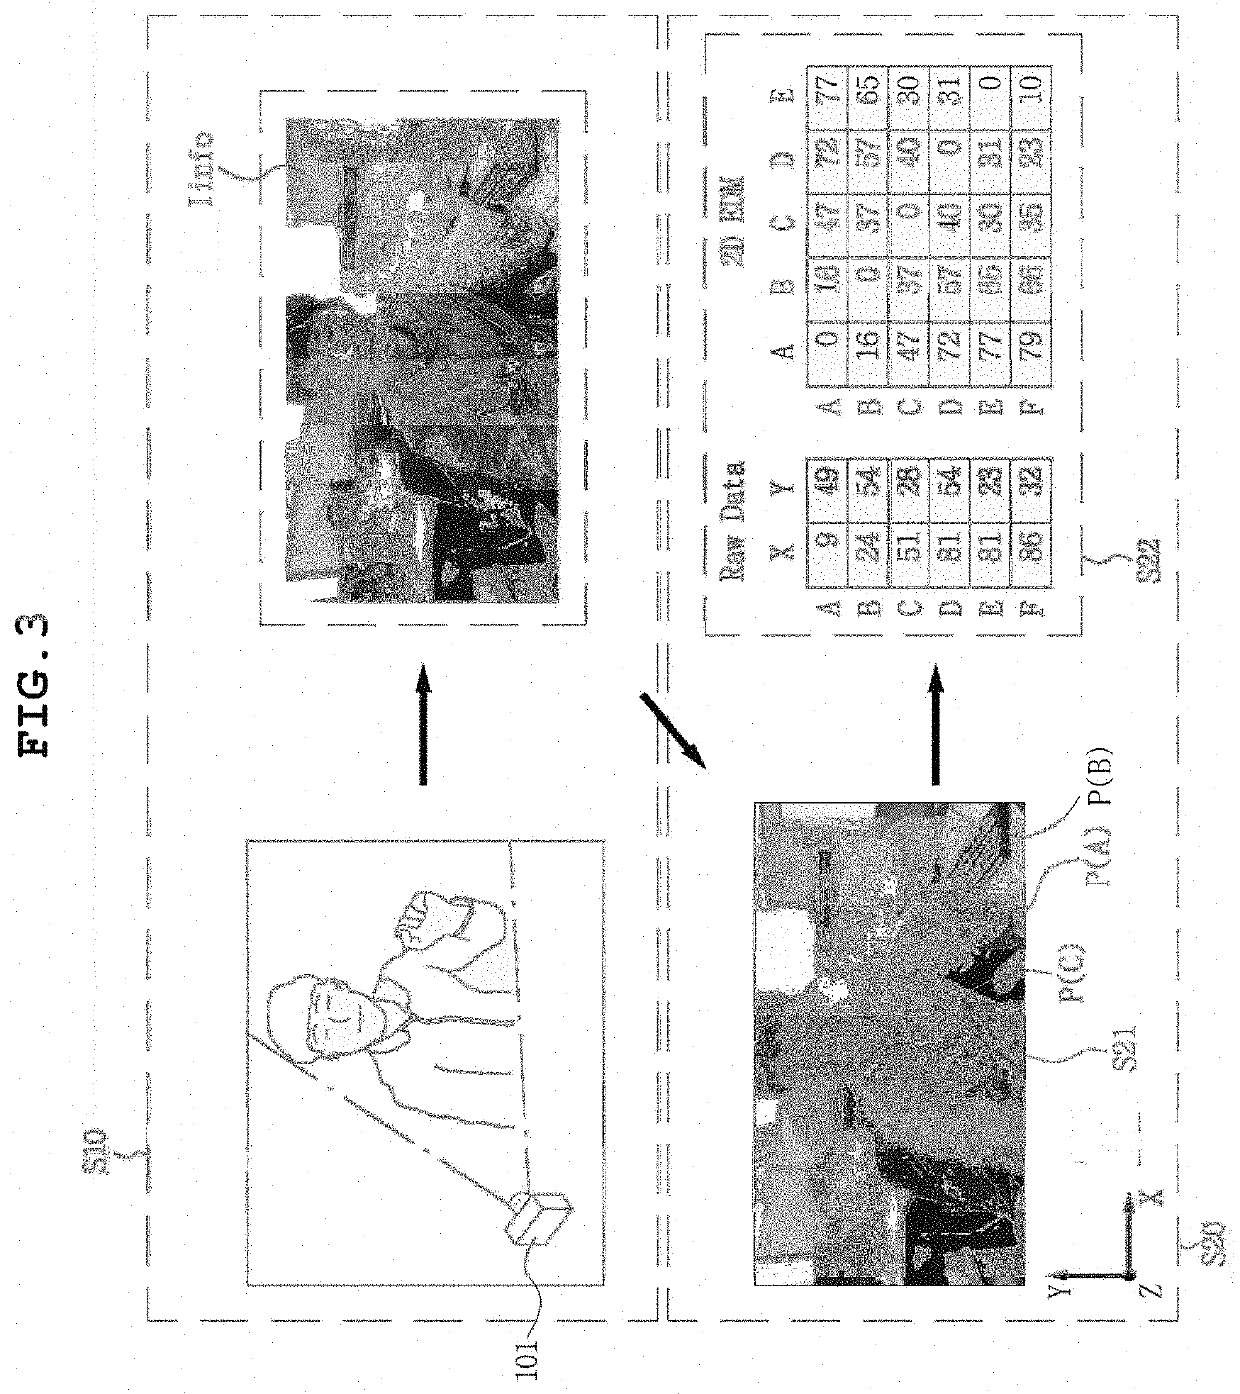 Method and apparatus for recognizing sign language or gesture using 3D edm